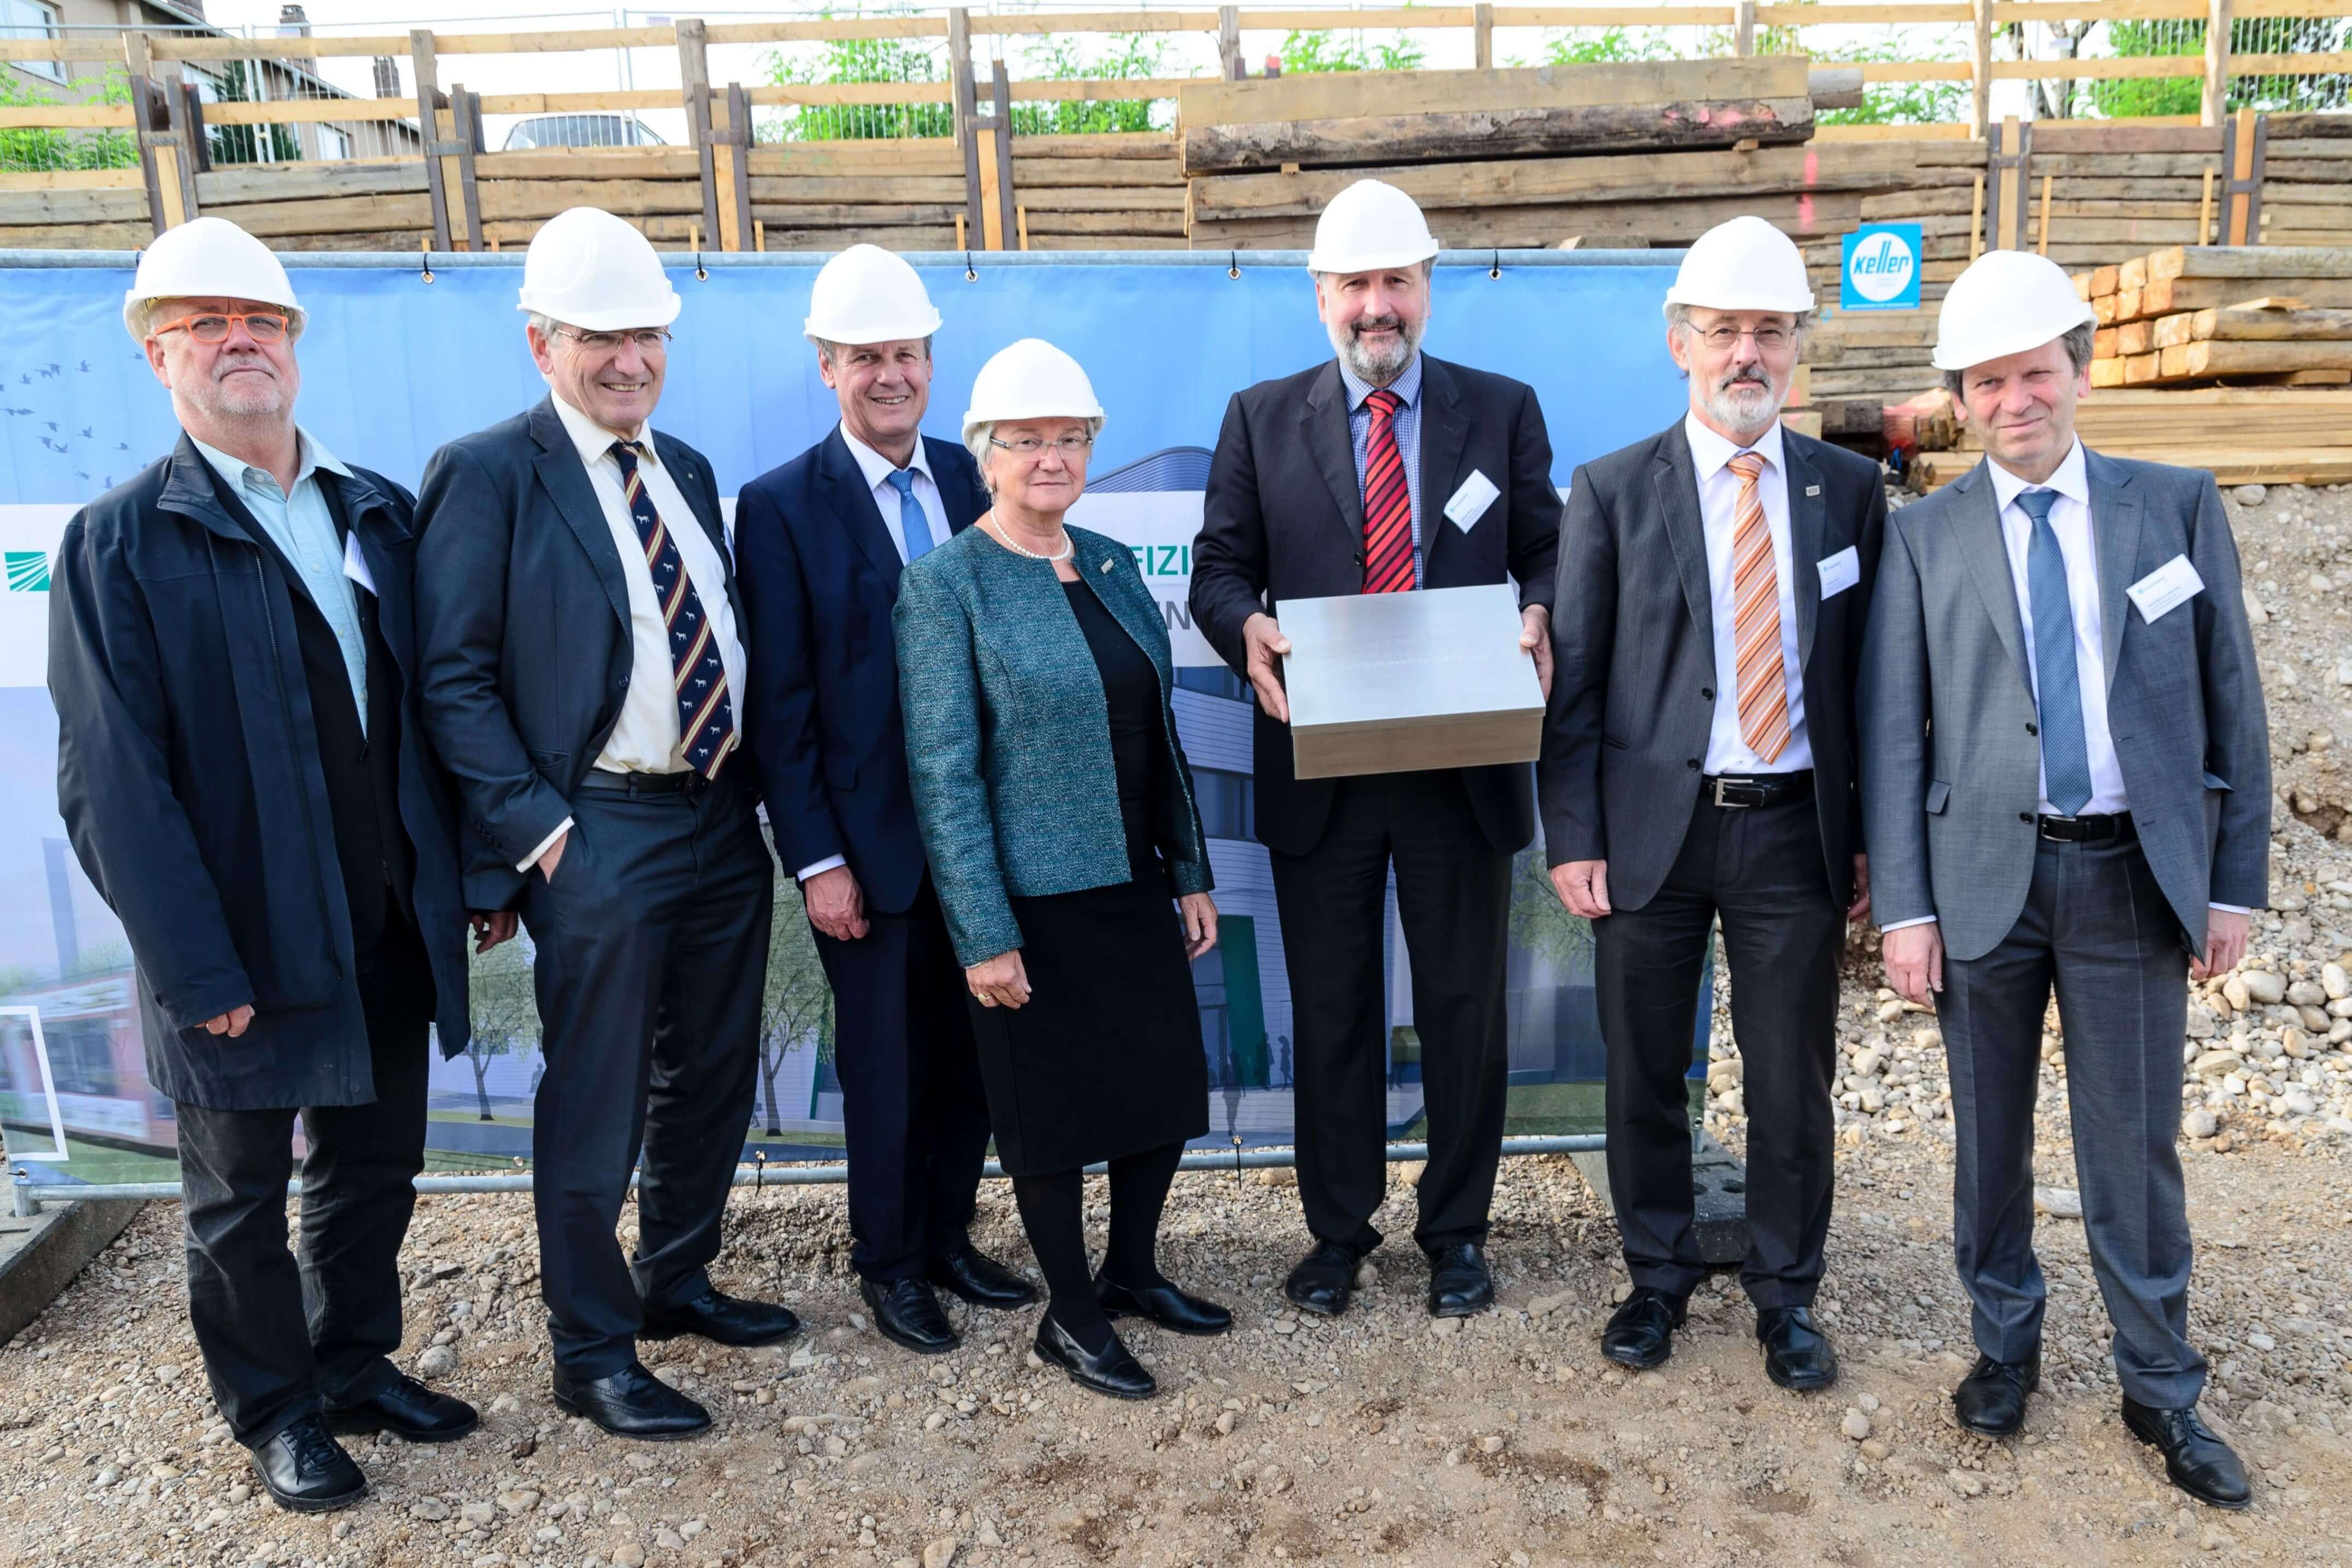 Cornerstone laid for "Center for High-Efficiency Solar Cells" at Fraunhofer ISE